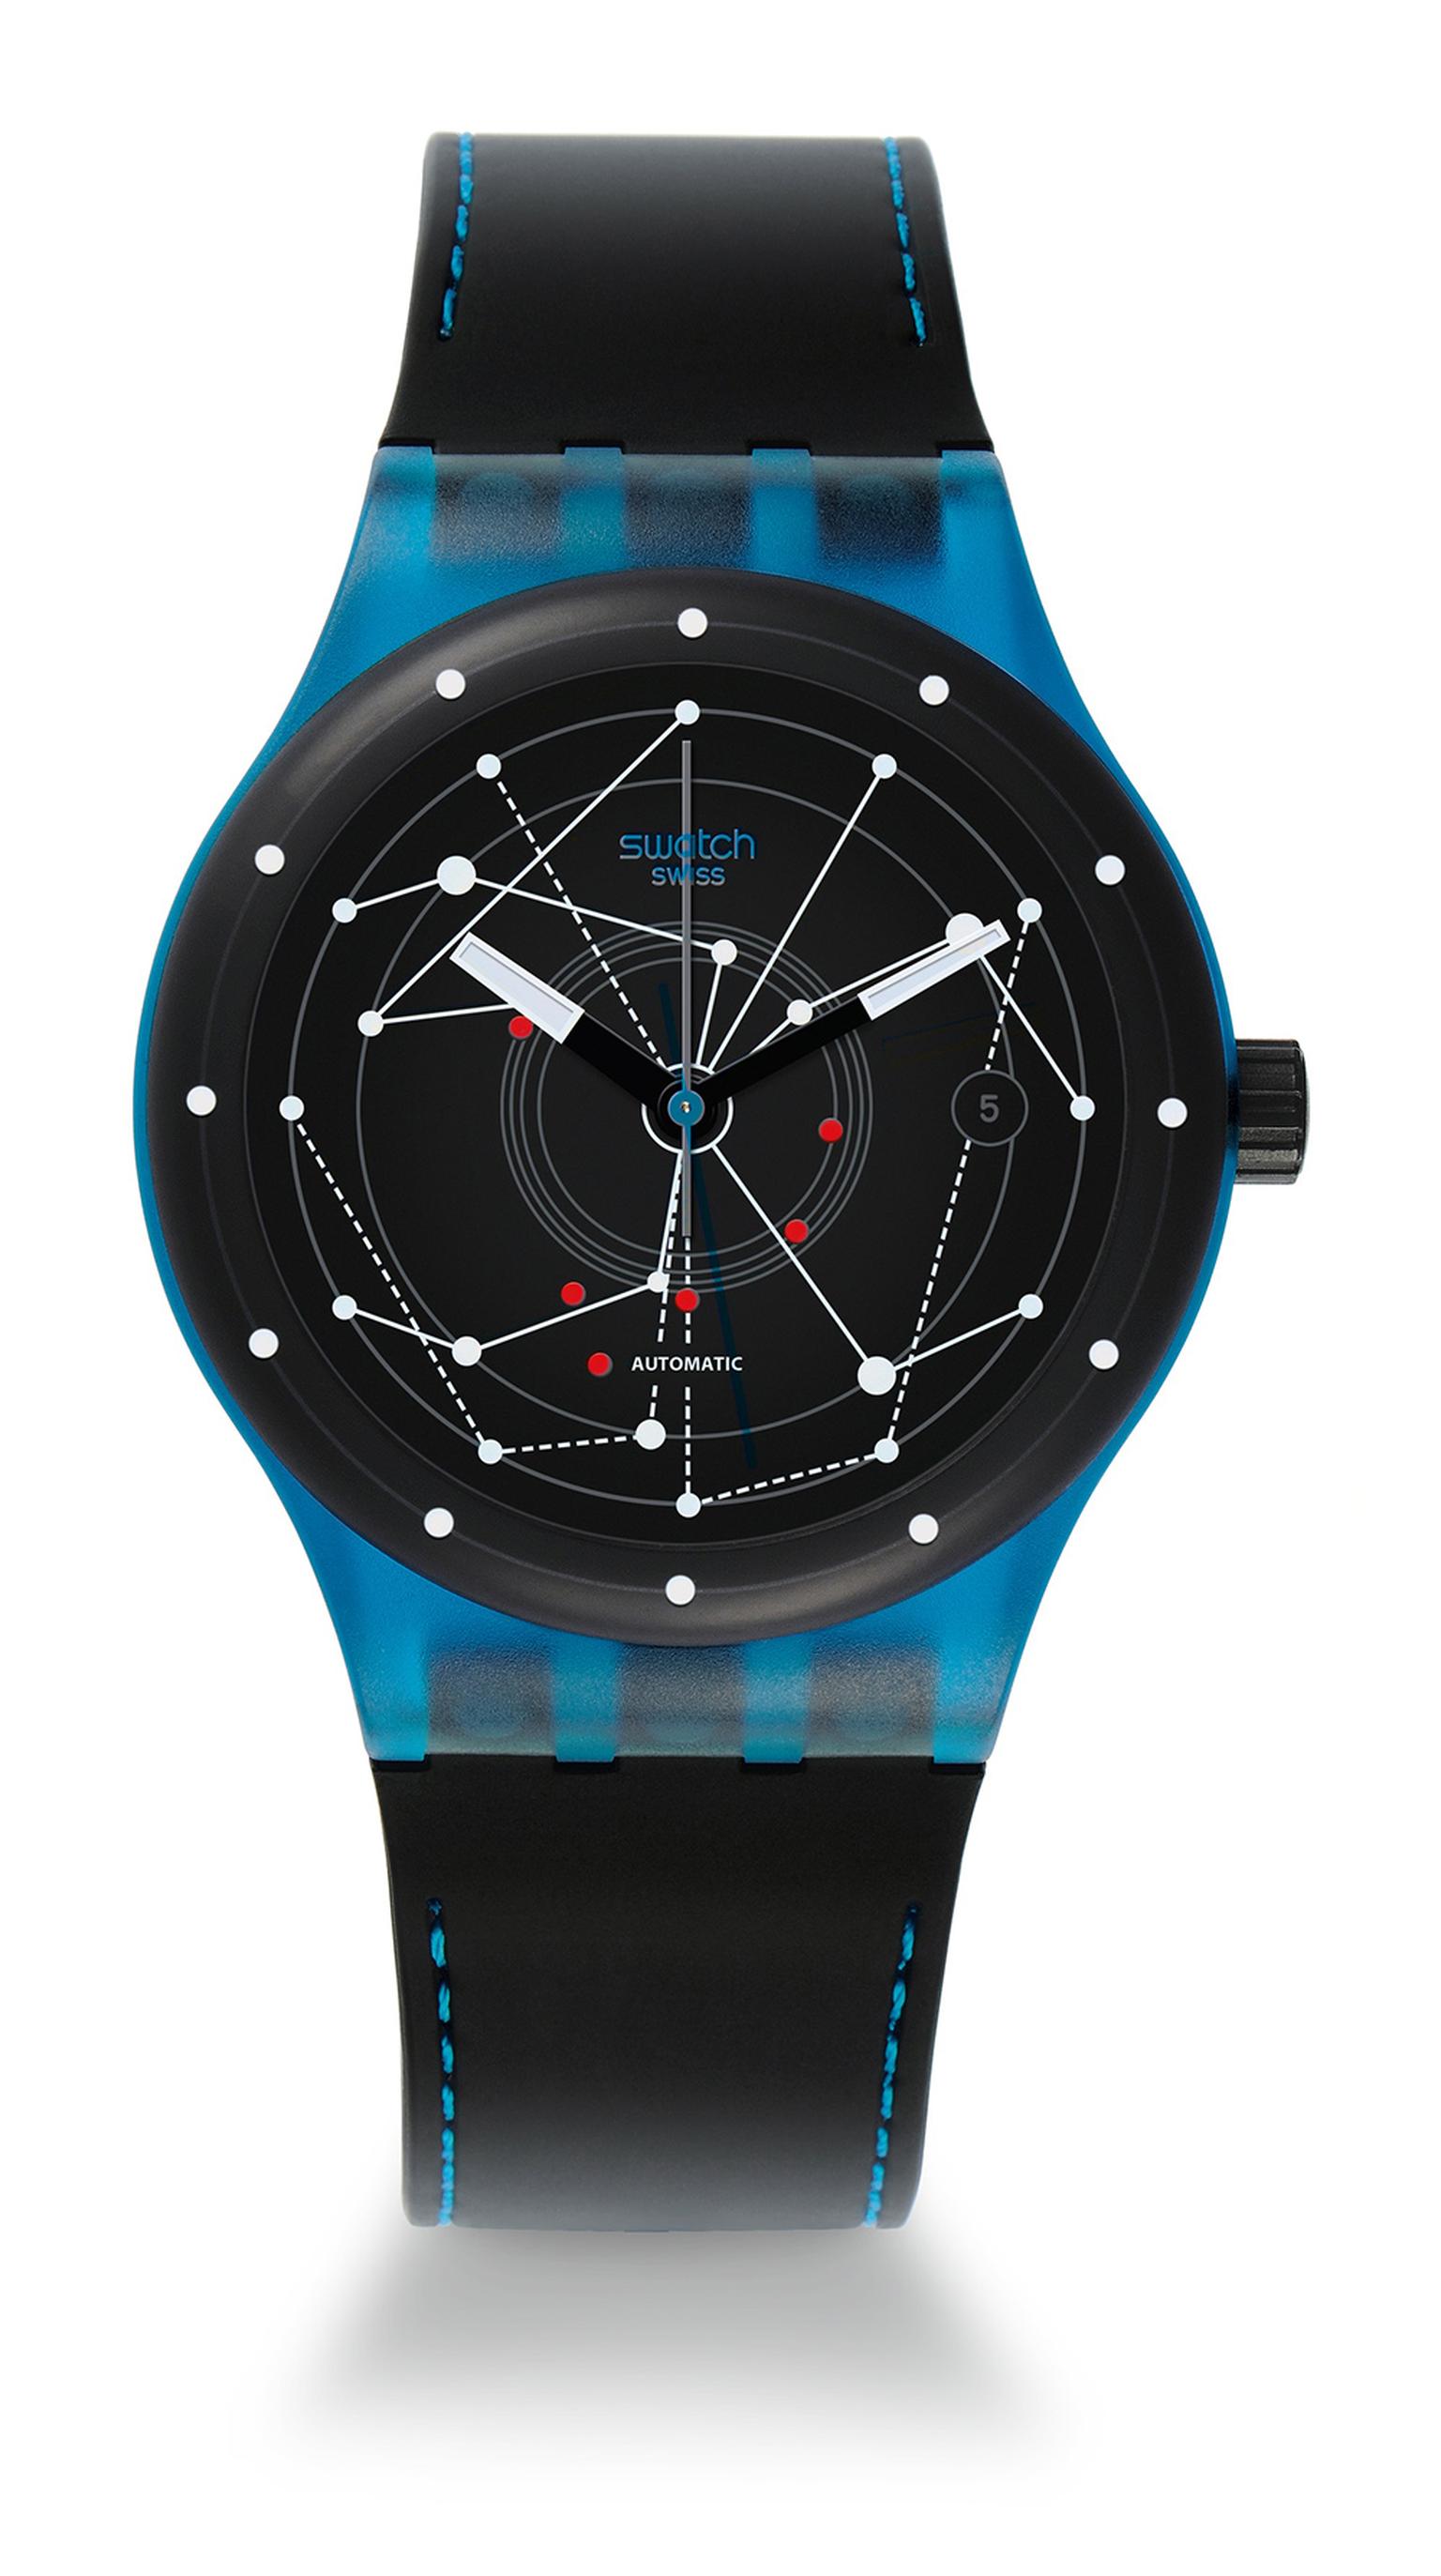 Swatch unveils a world first at Baselworld: the revolutionary new Sistem51 watch